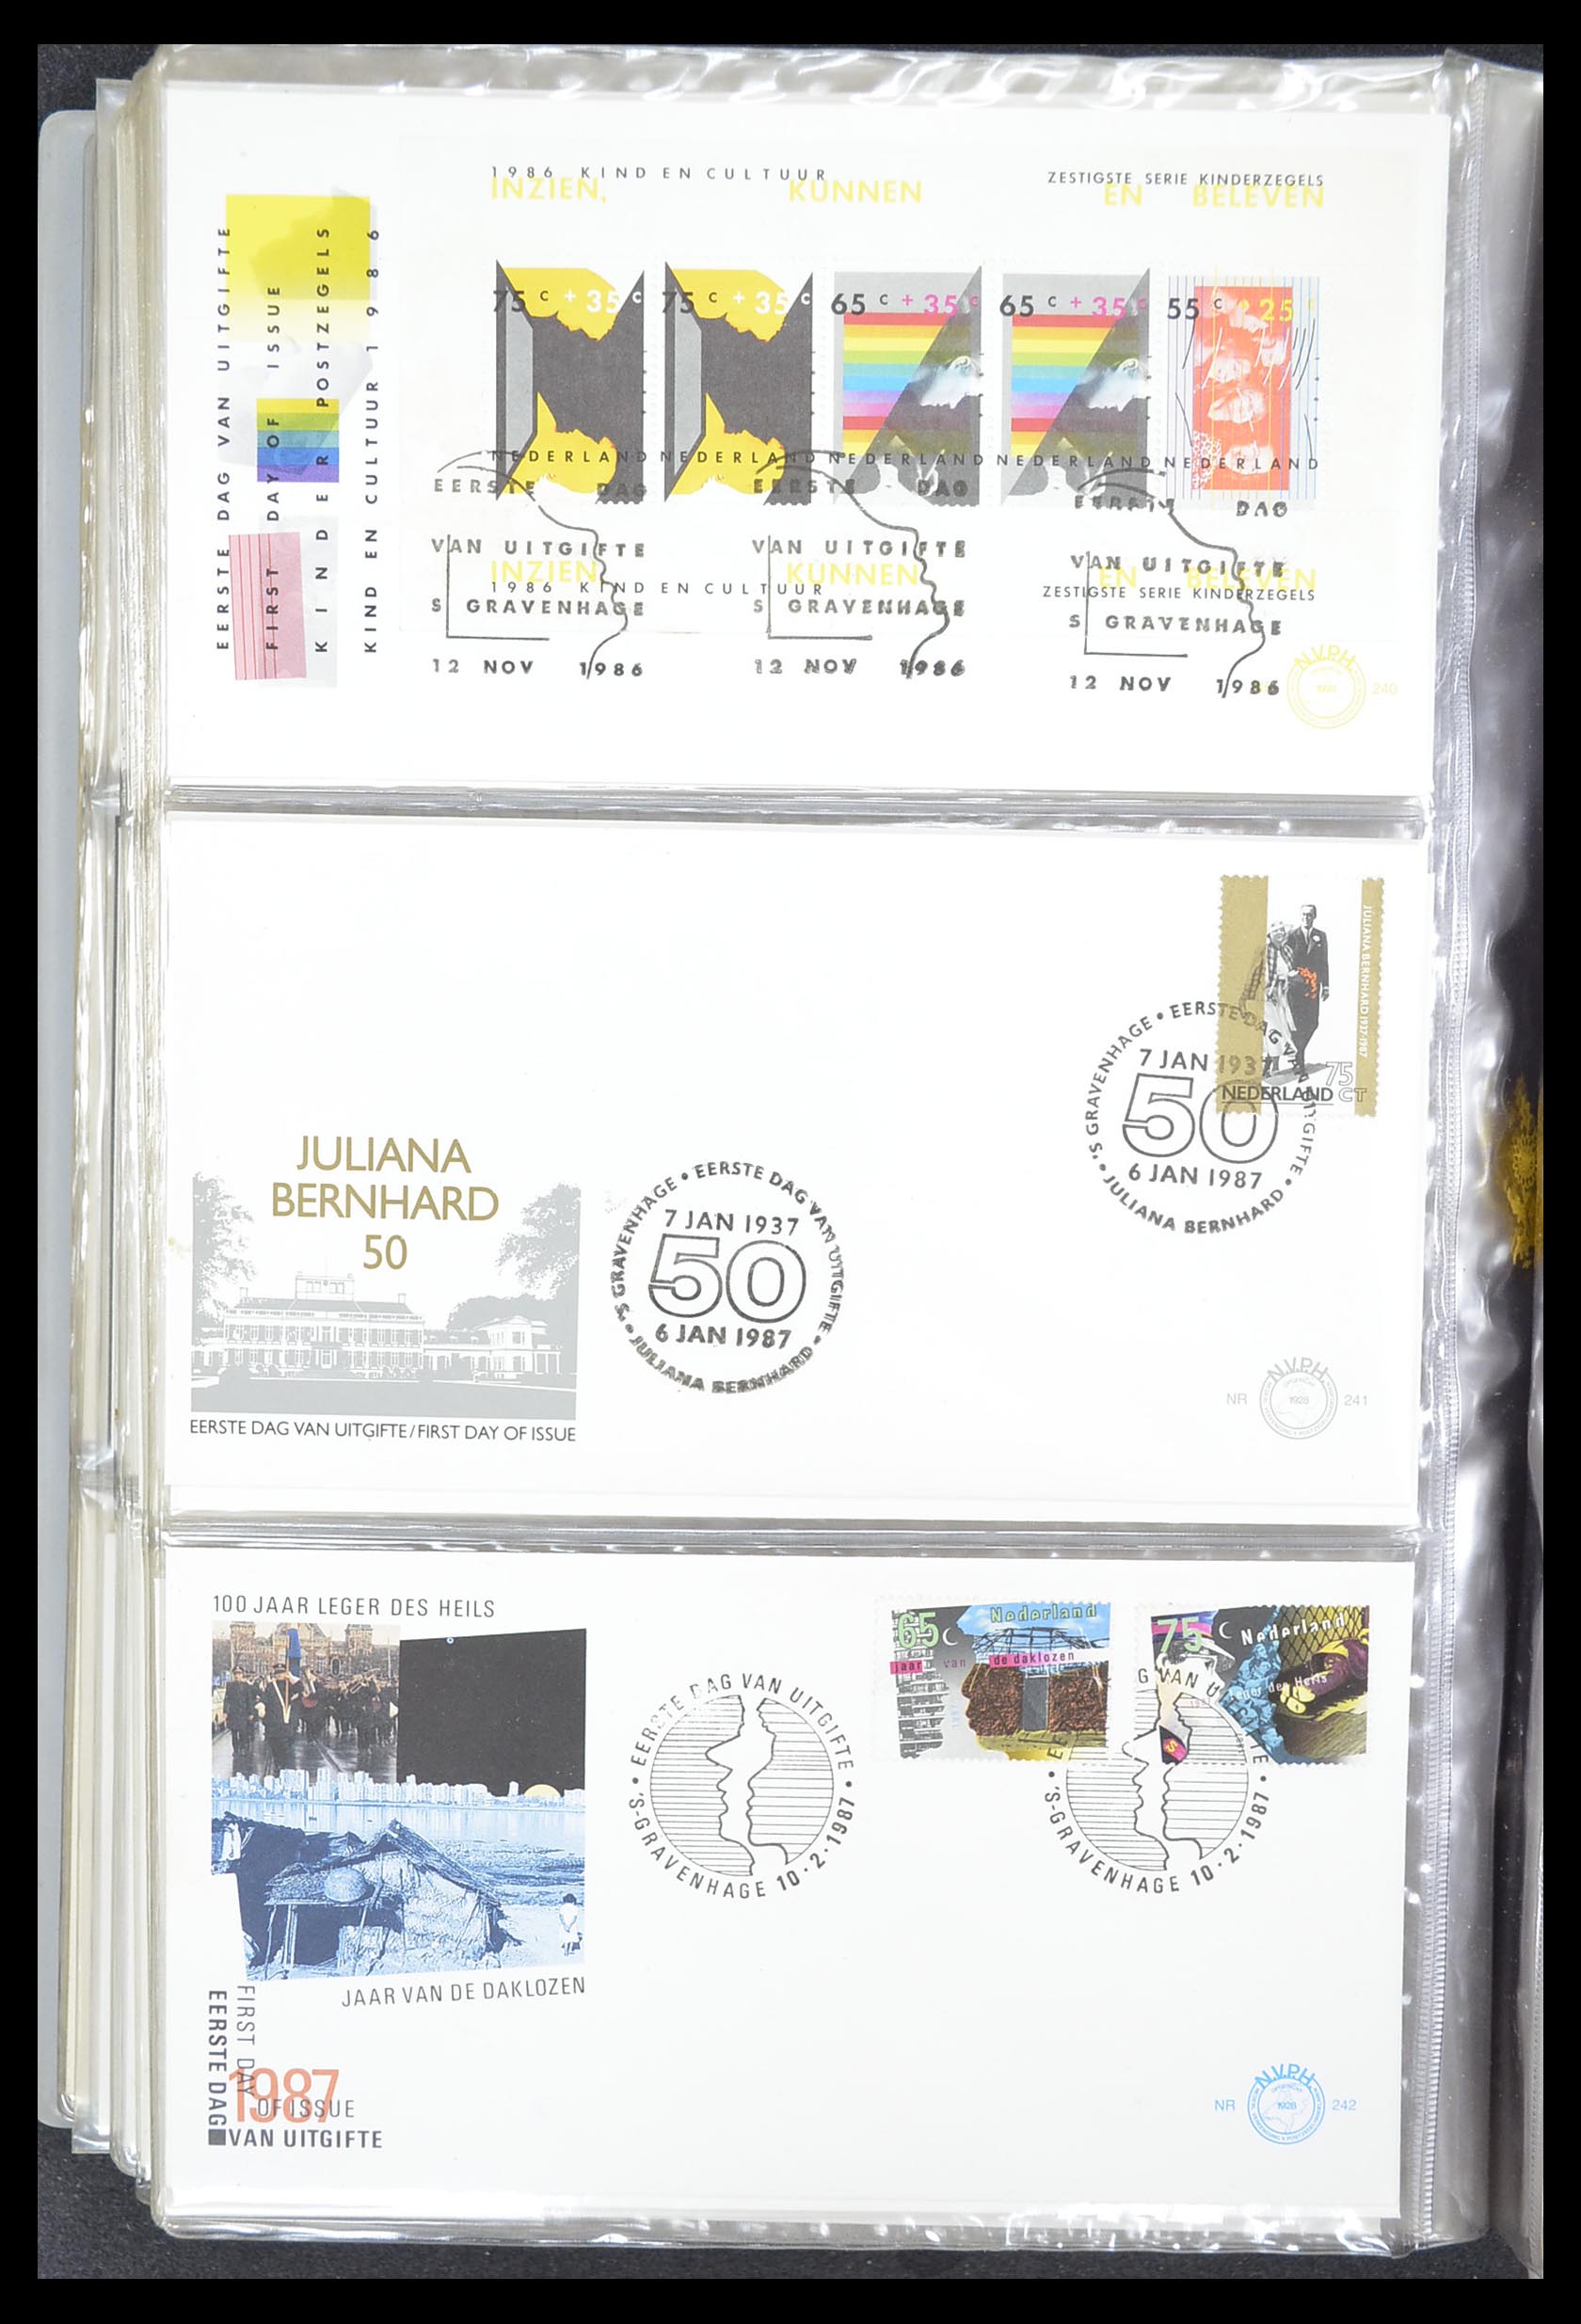 33369 088 - Stamp collection 33369 Netherlands FDC's 1950-1989.